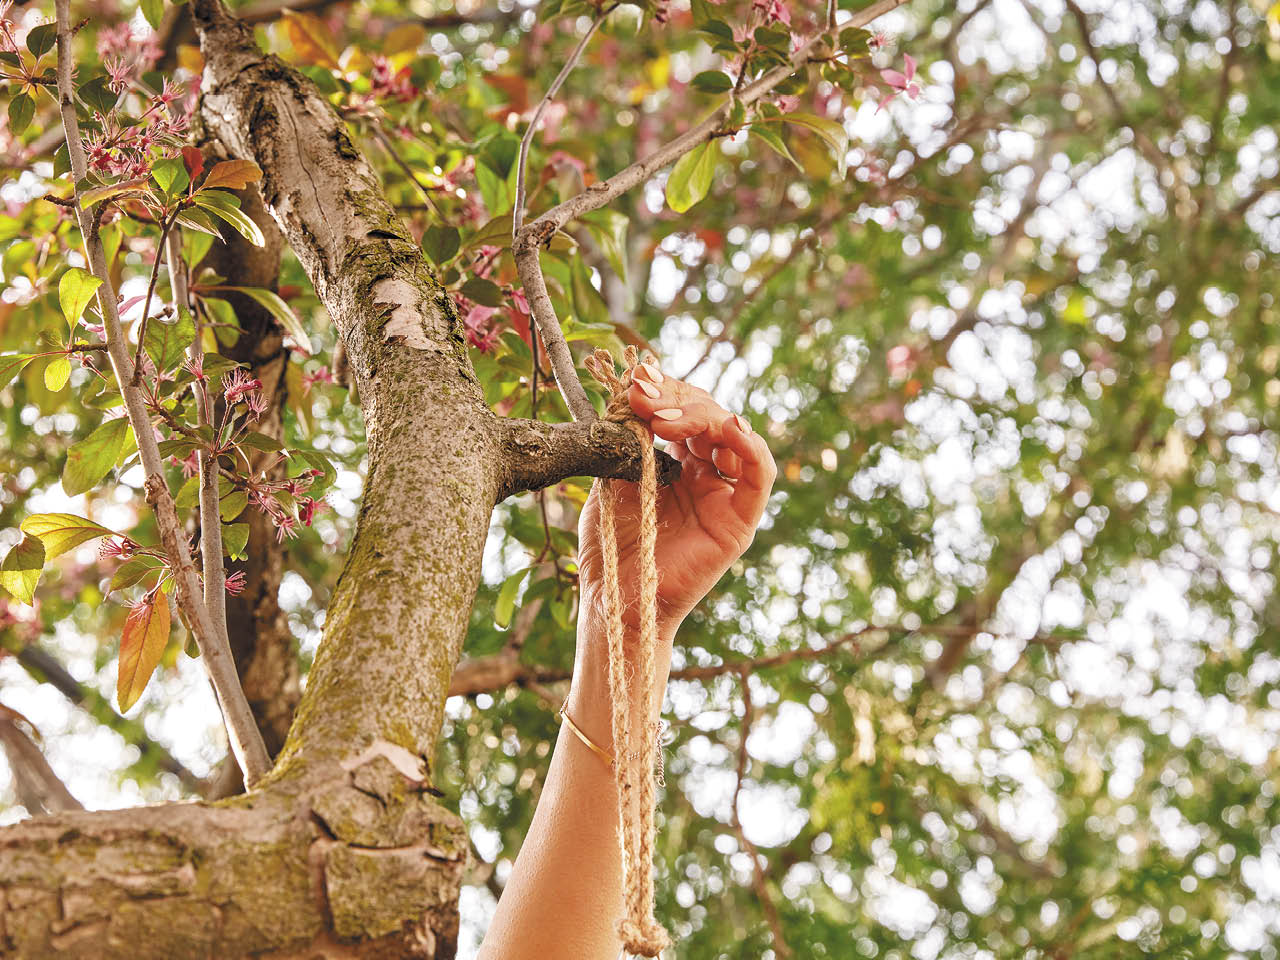 A hand seen close-up hanging a solar-powered outdoor pendant light from a tree branch.